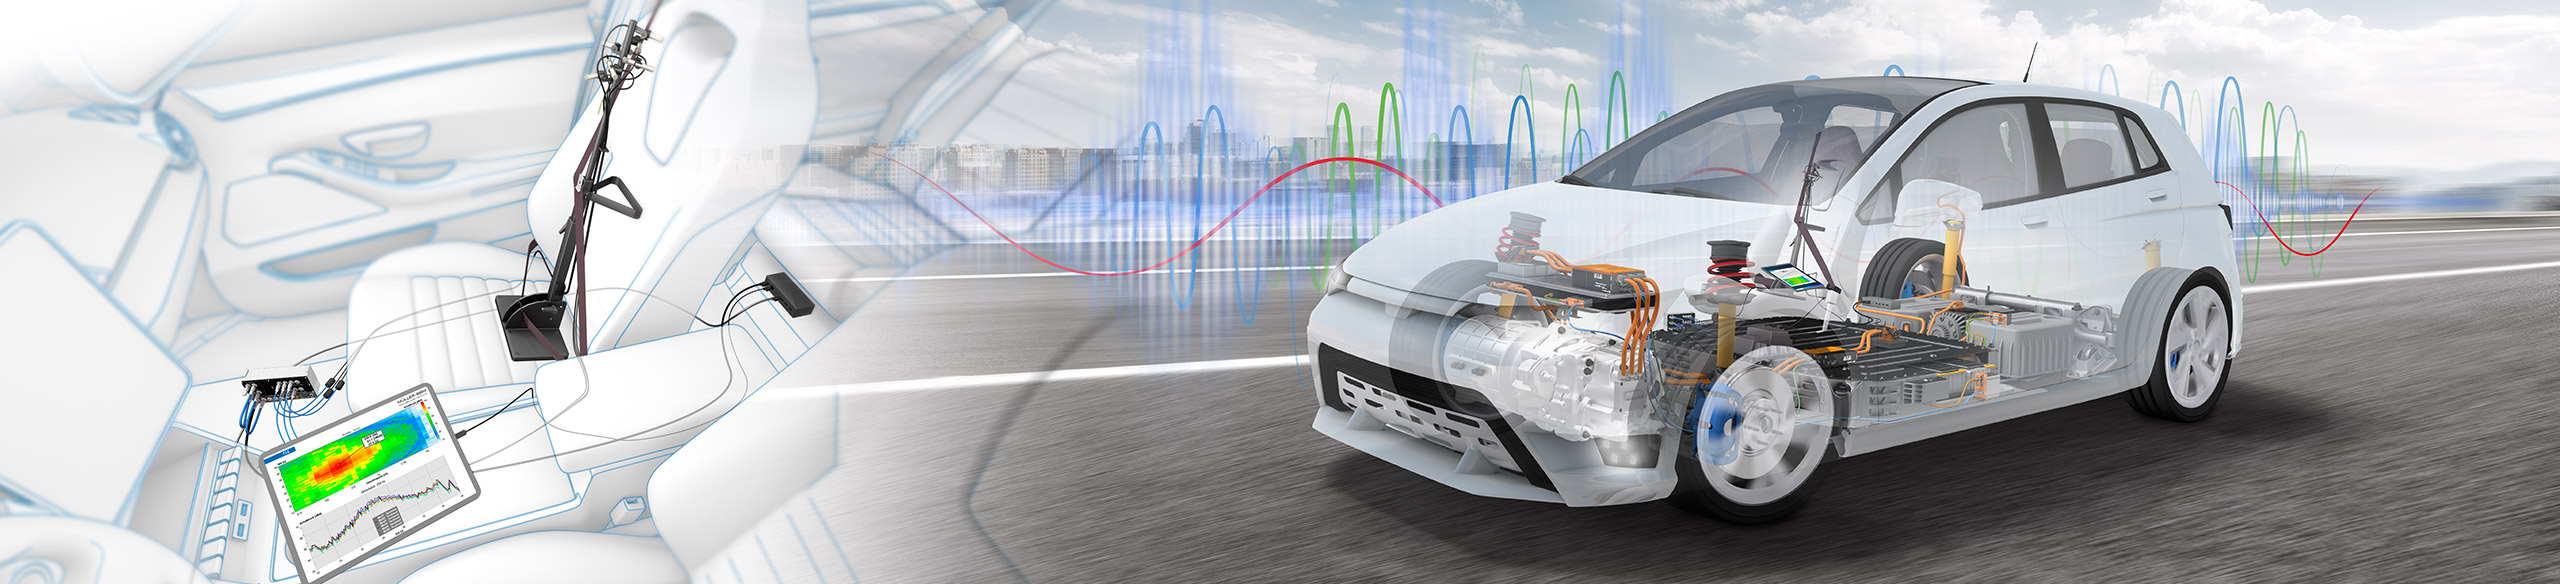 High-voltage Measurement Technology and NVH in Mobile Testing